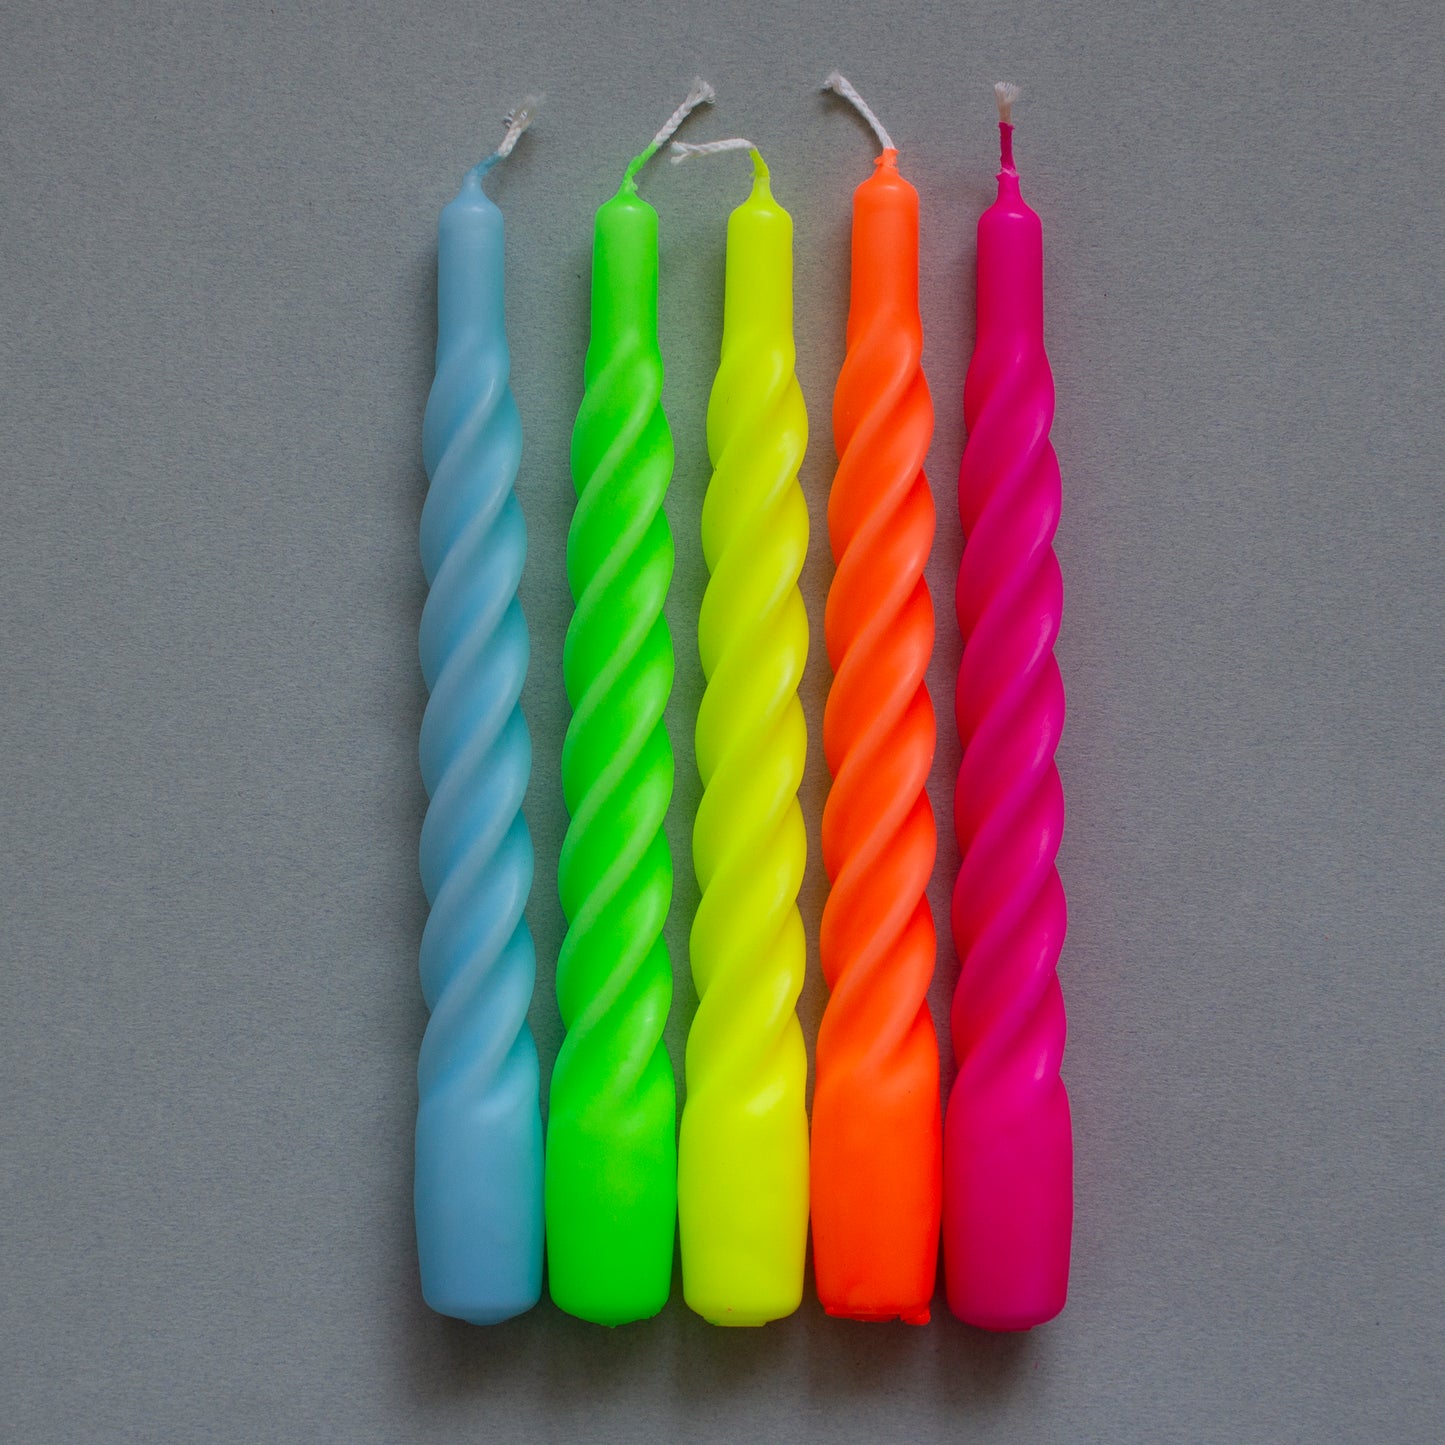 5 TWISTED NEON CANDLES